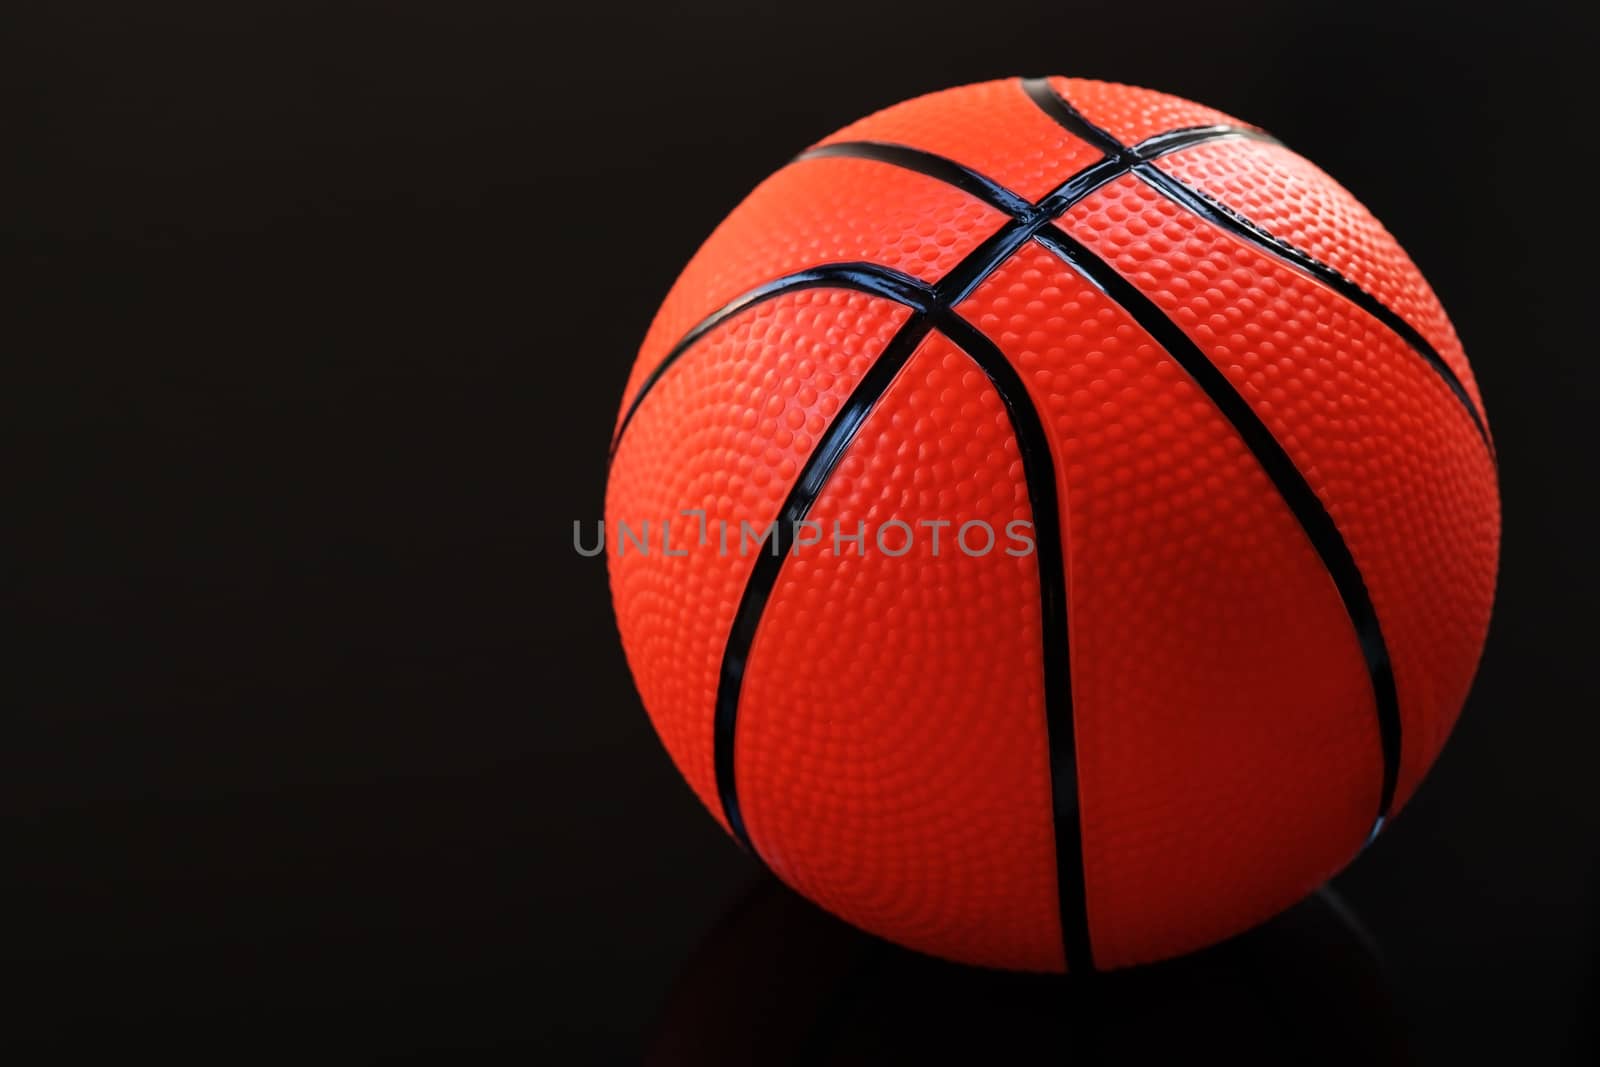 Basketball on a black background as a sports and fitness activity